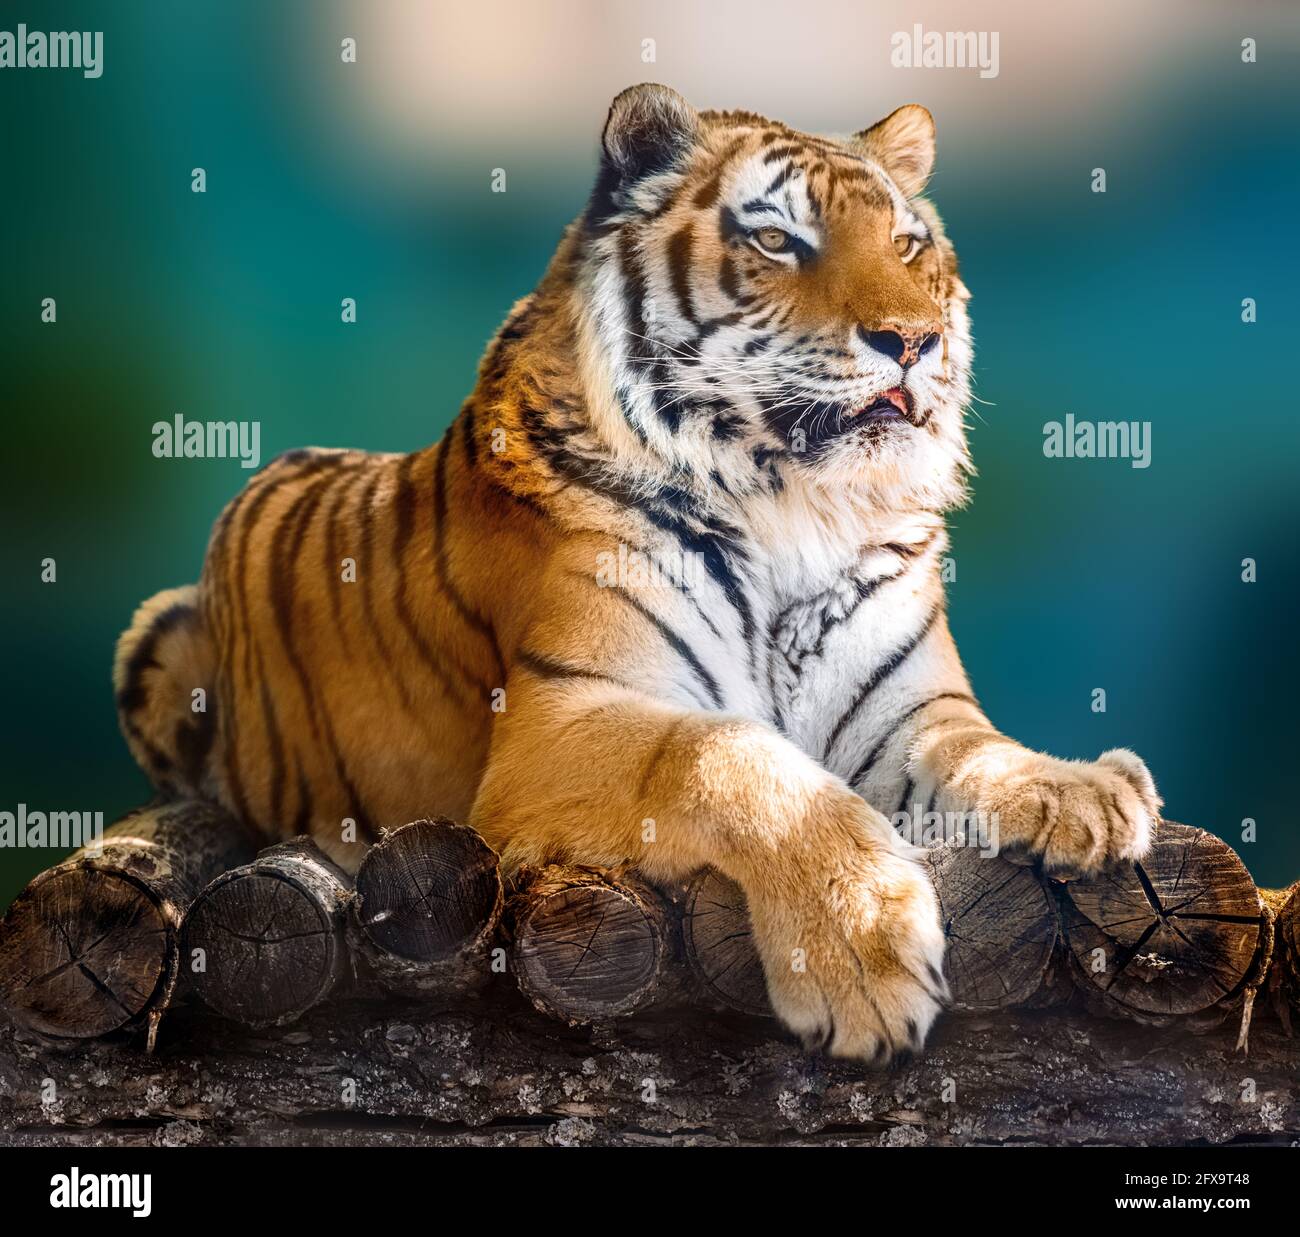 Siberian or Amur tiger with black stripes lying down on wooden deck. Full size portrait looking right. Close view with green blurred background. Wild Stock Photo